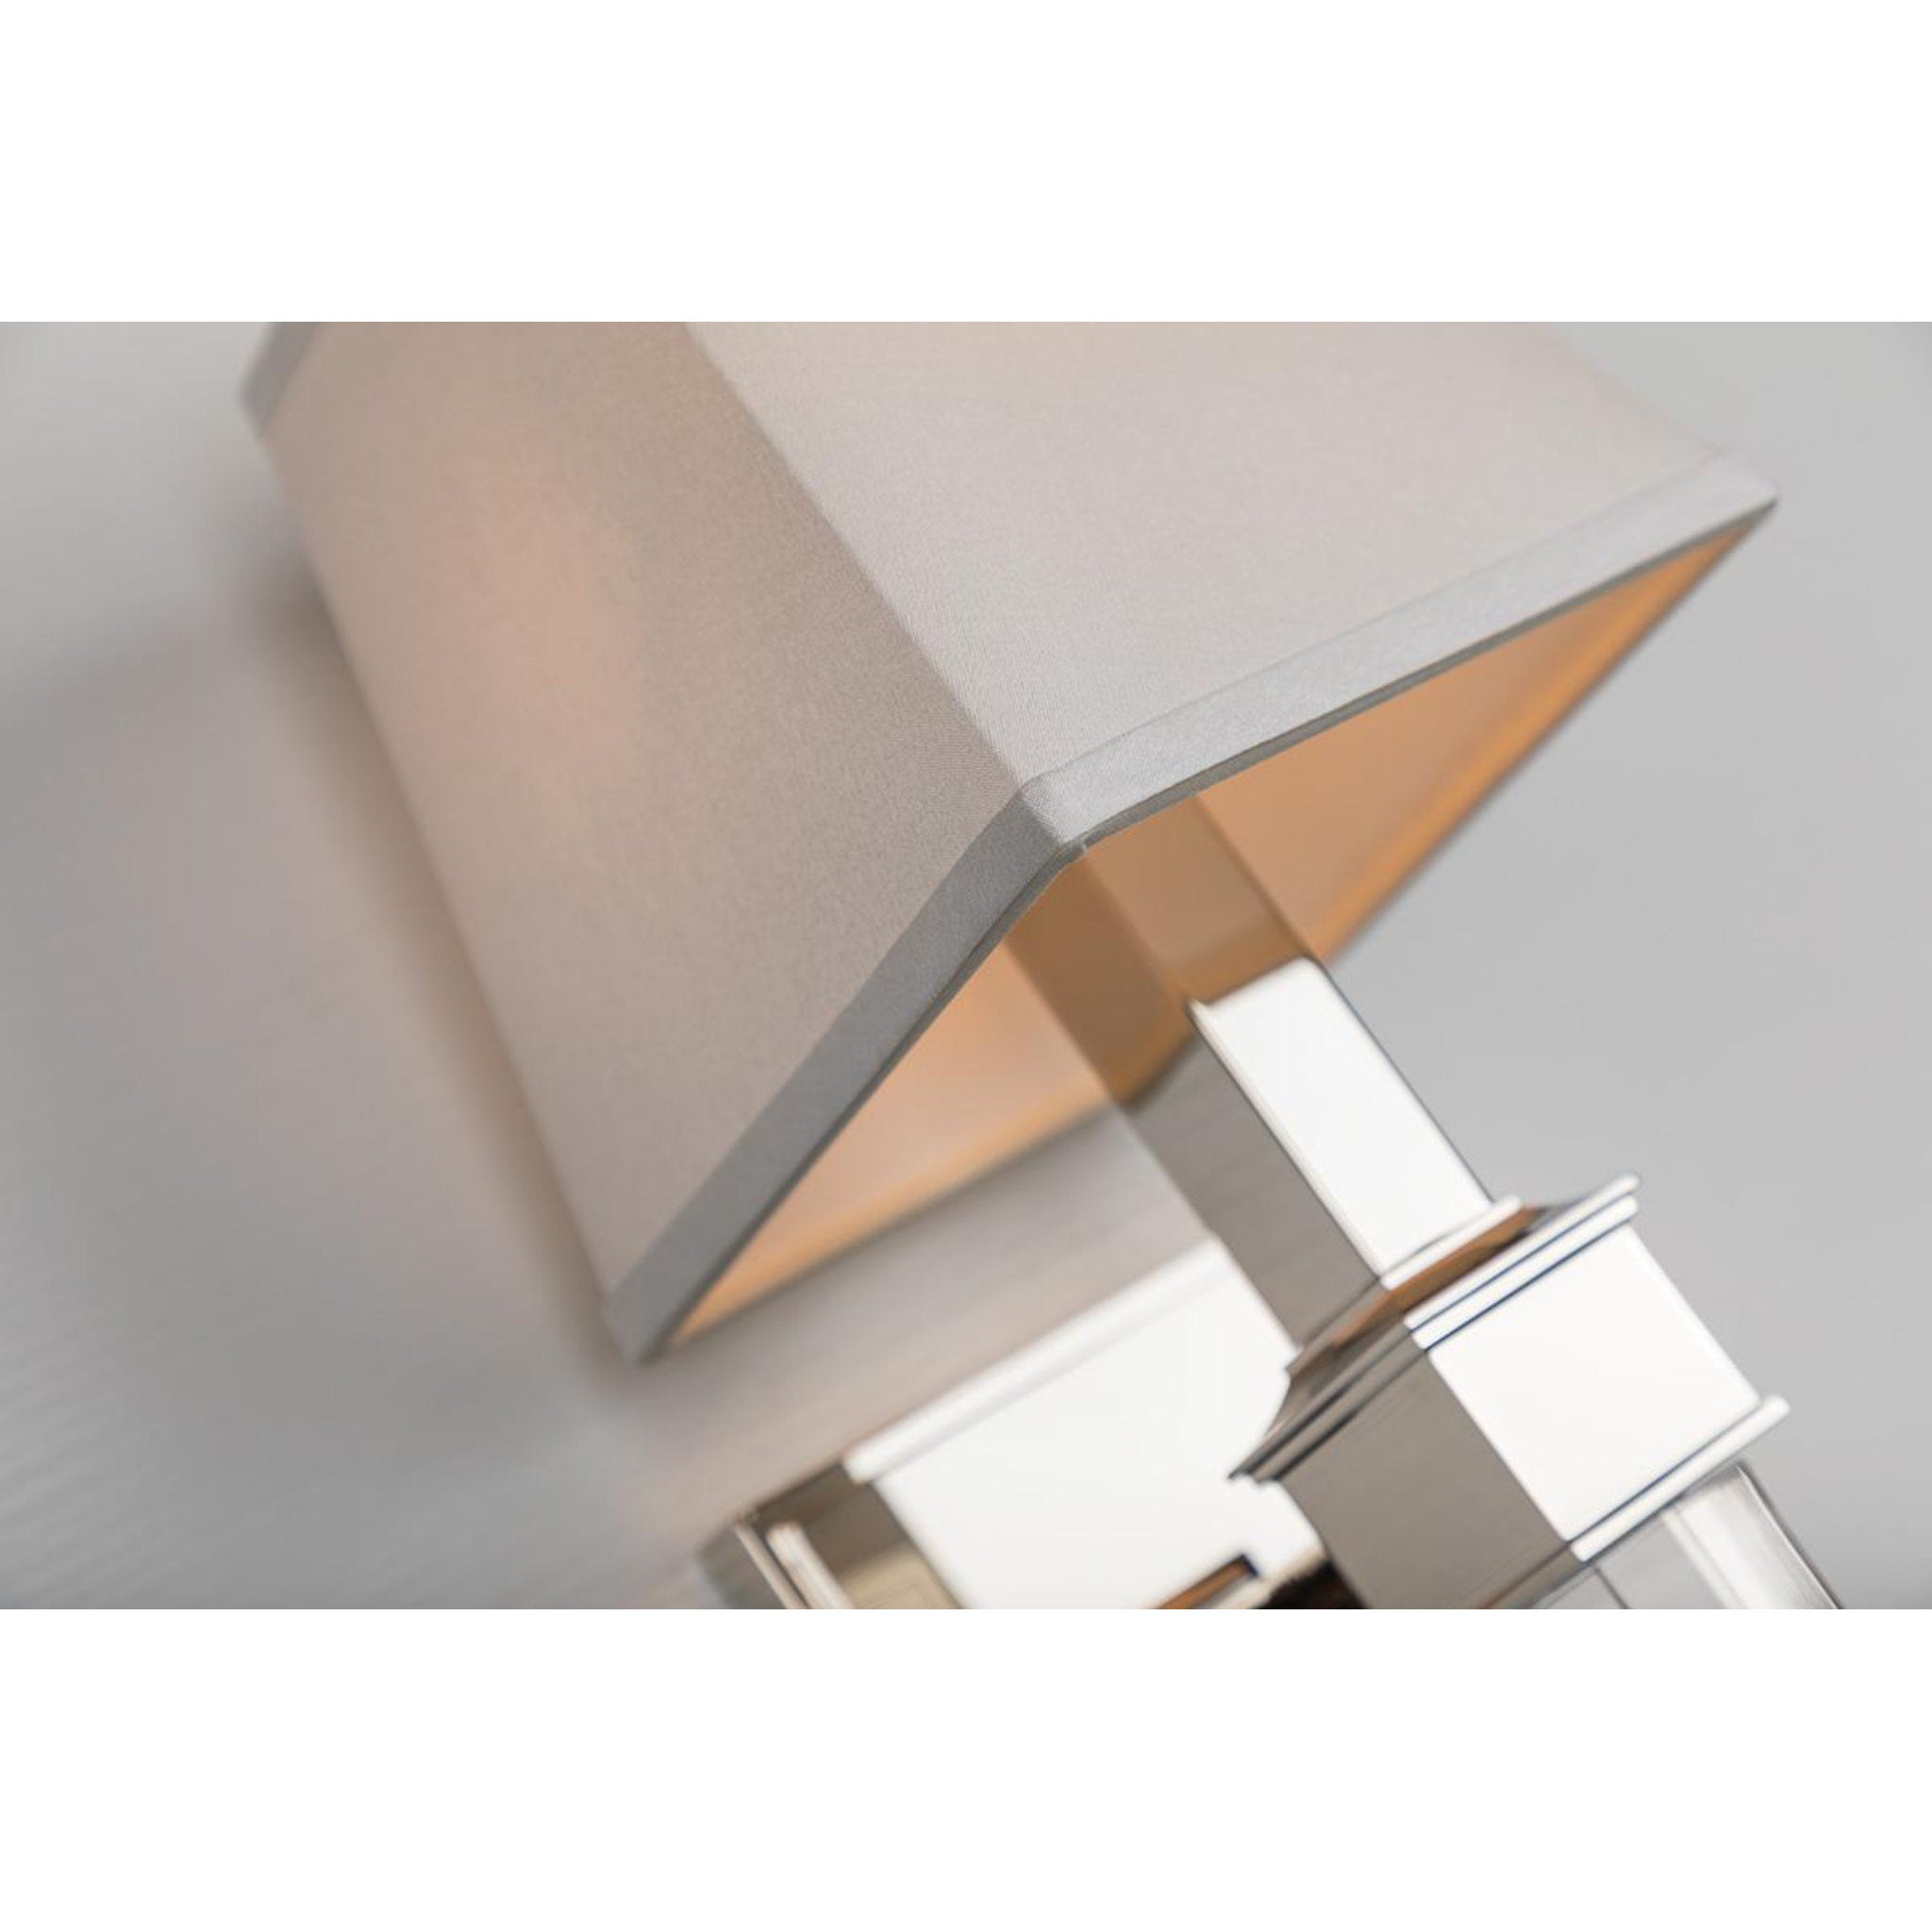 Ruskin 1 Light Wall Sconce in Polished Nickel